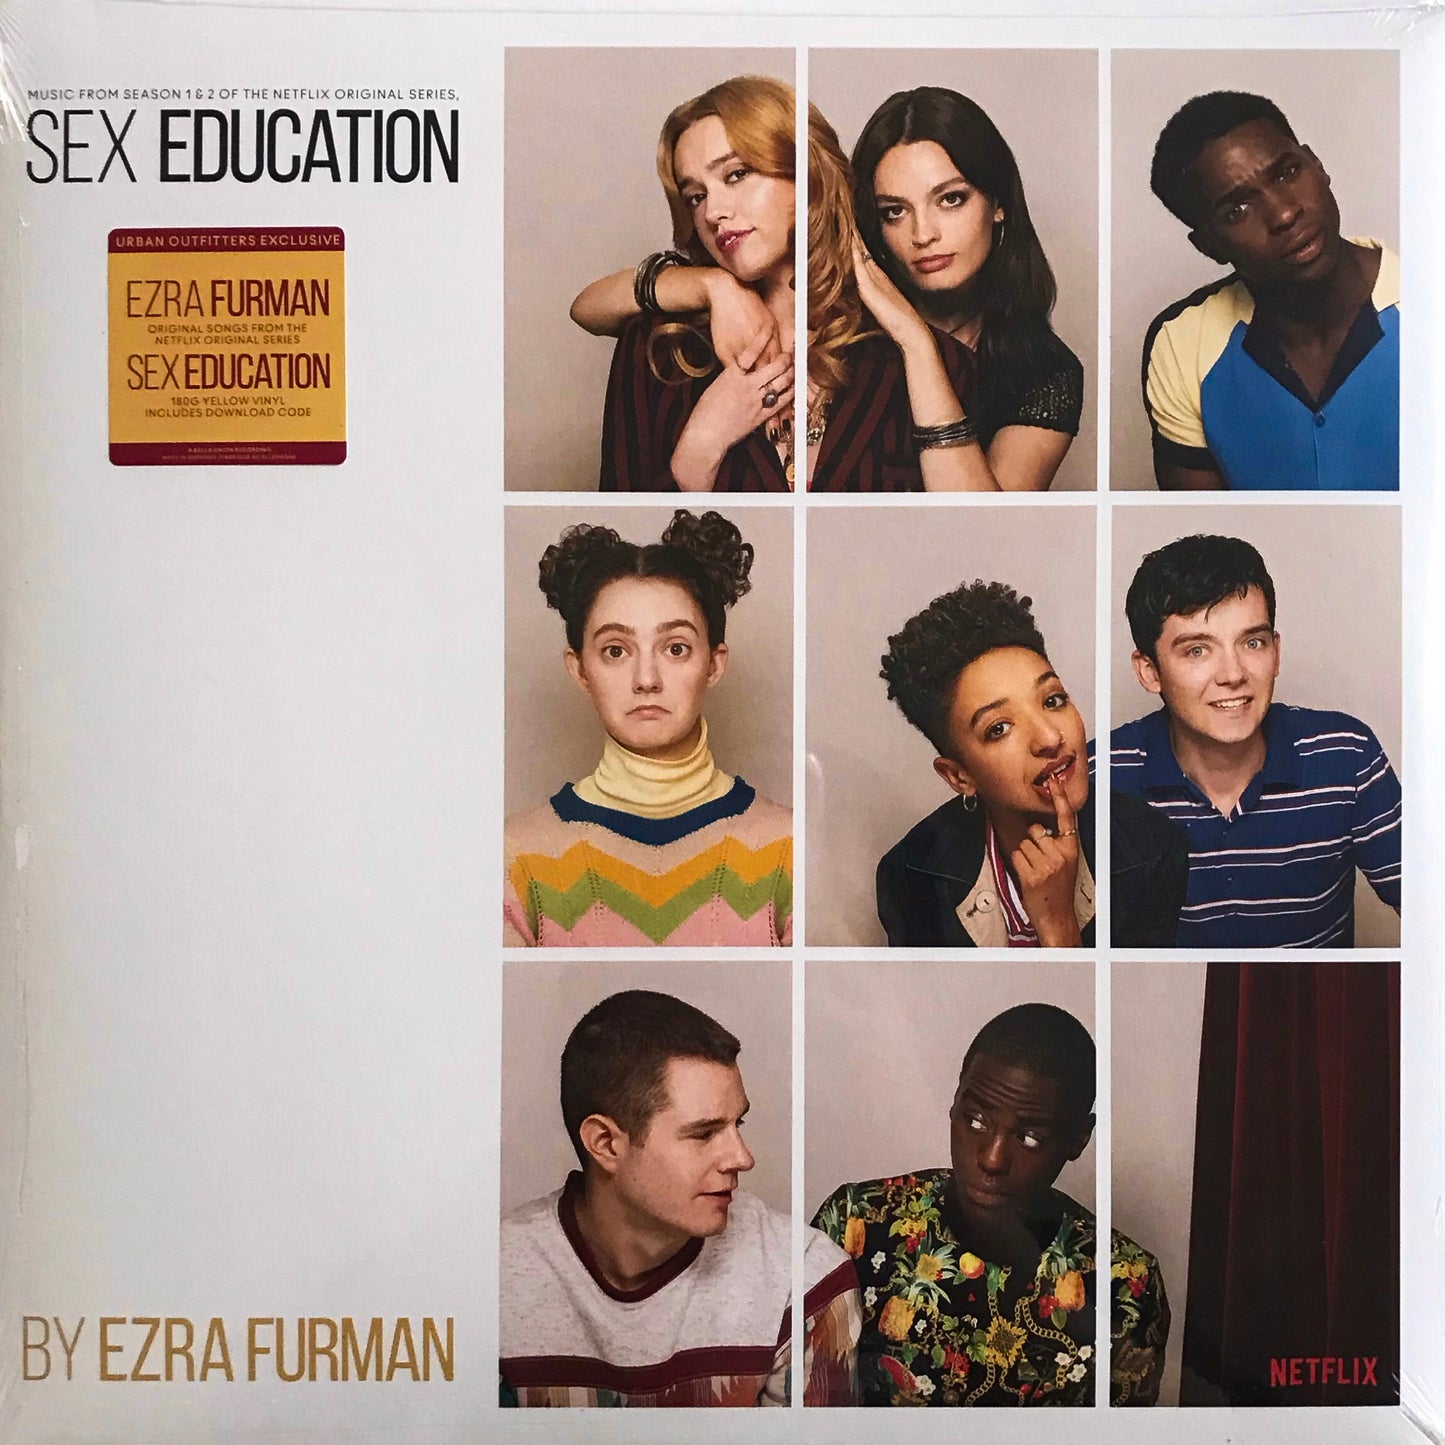 Sex Education: Music from Season 1 & 2 of the Netflix Original Series (Limited Edition 180g Yellow Vinyl)